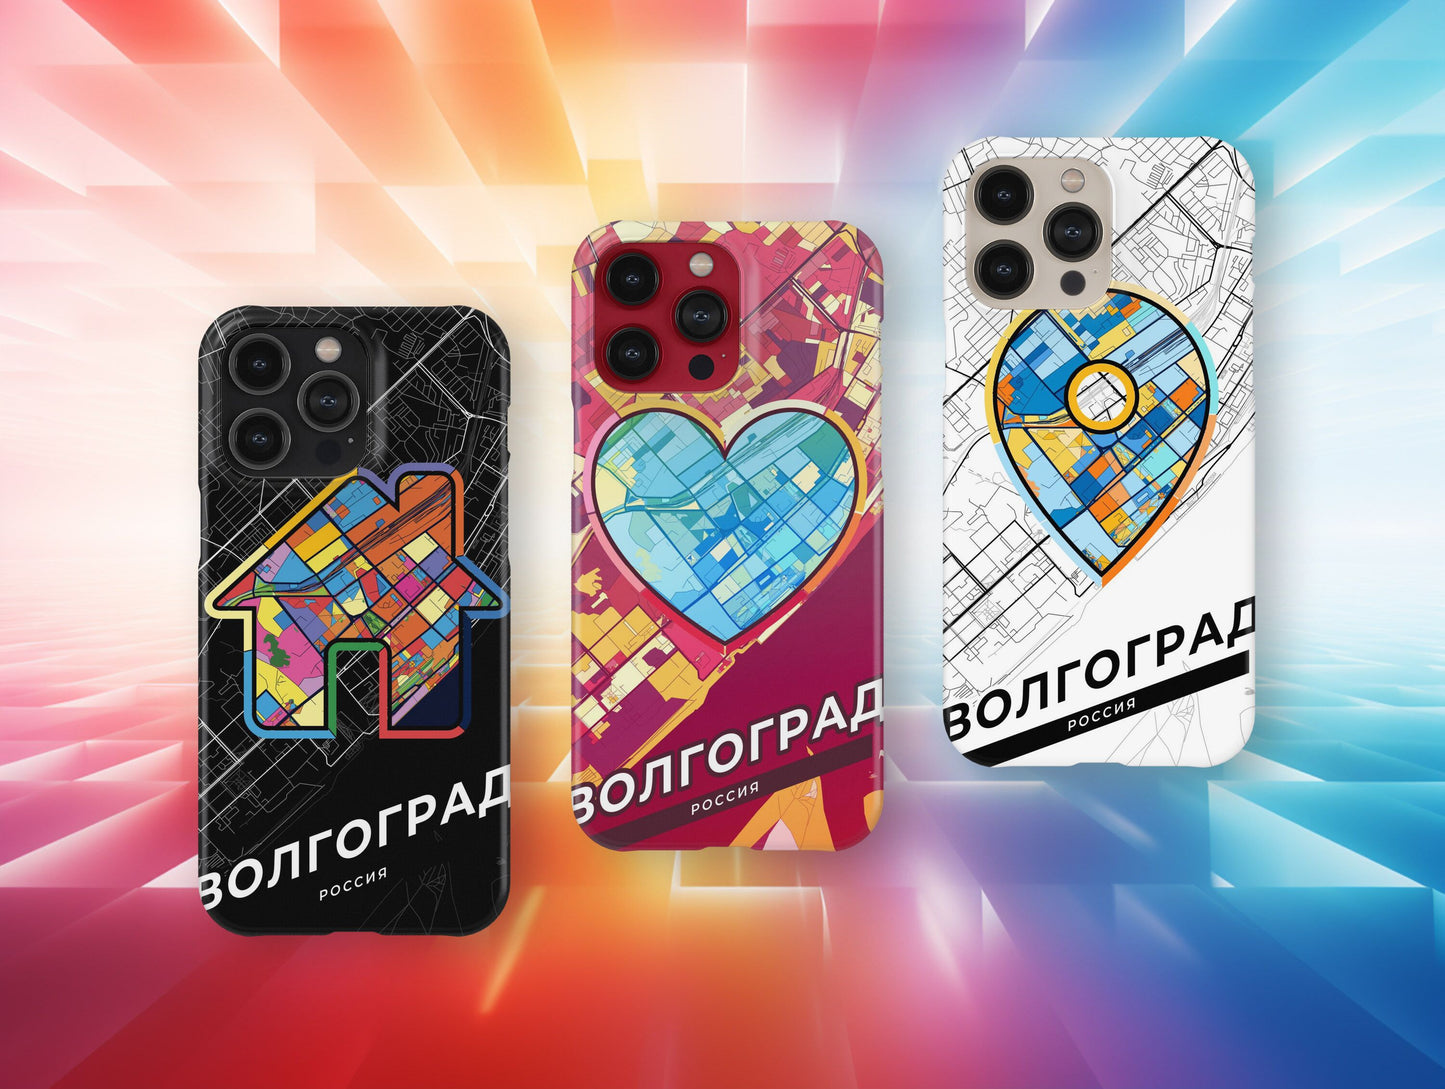 Volgograd Russia slim phone case with colorful icon. Birthday, wedding or housewarming gift. Couple match cases.